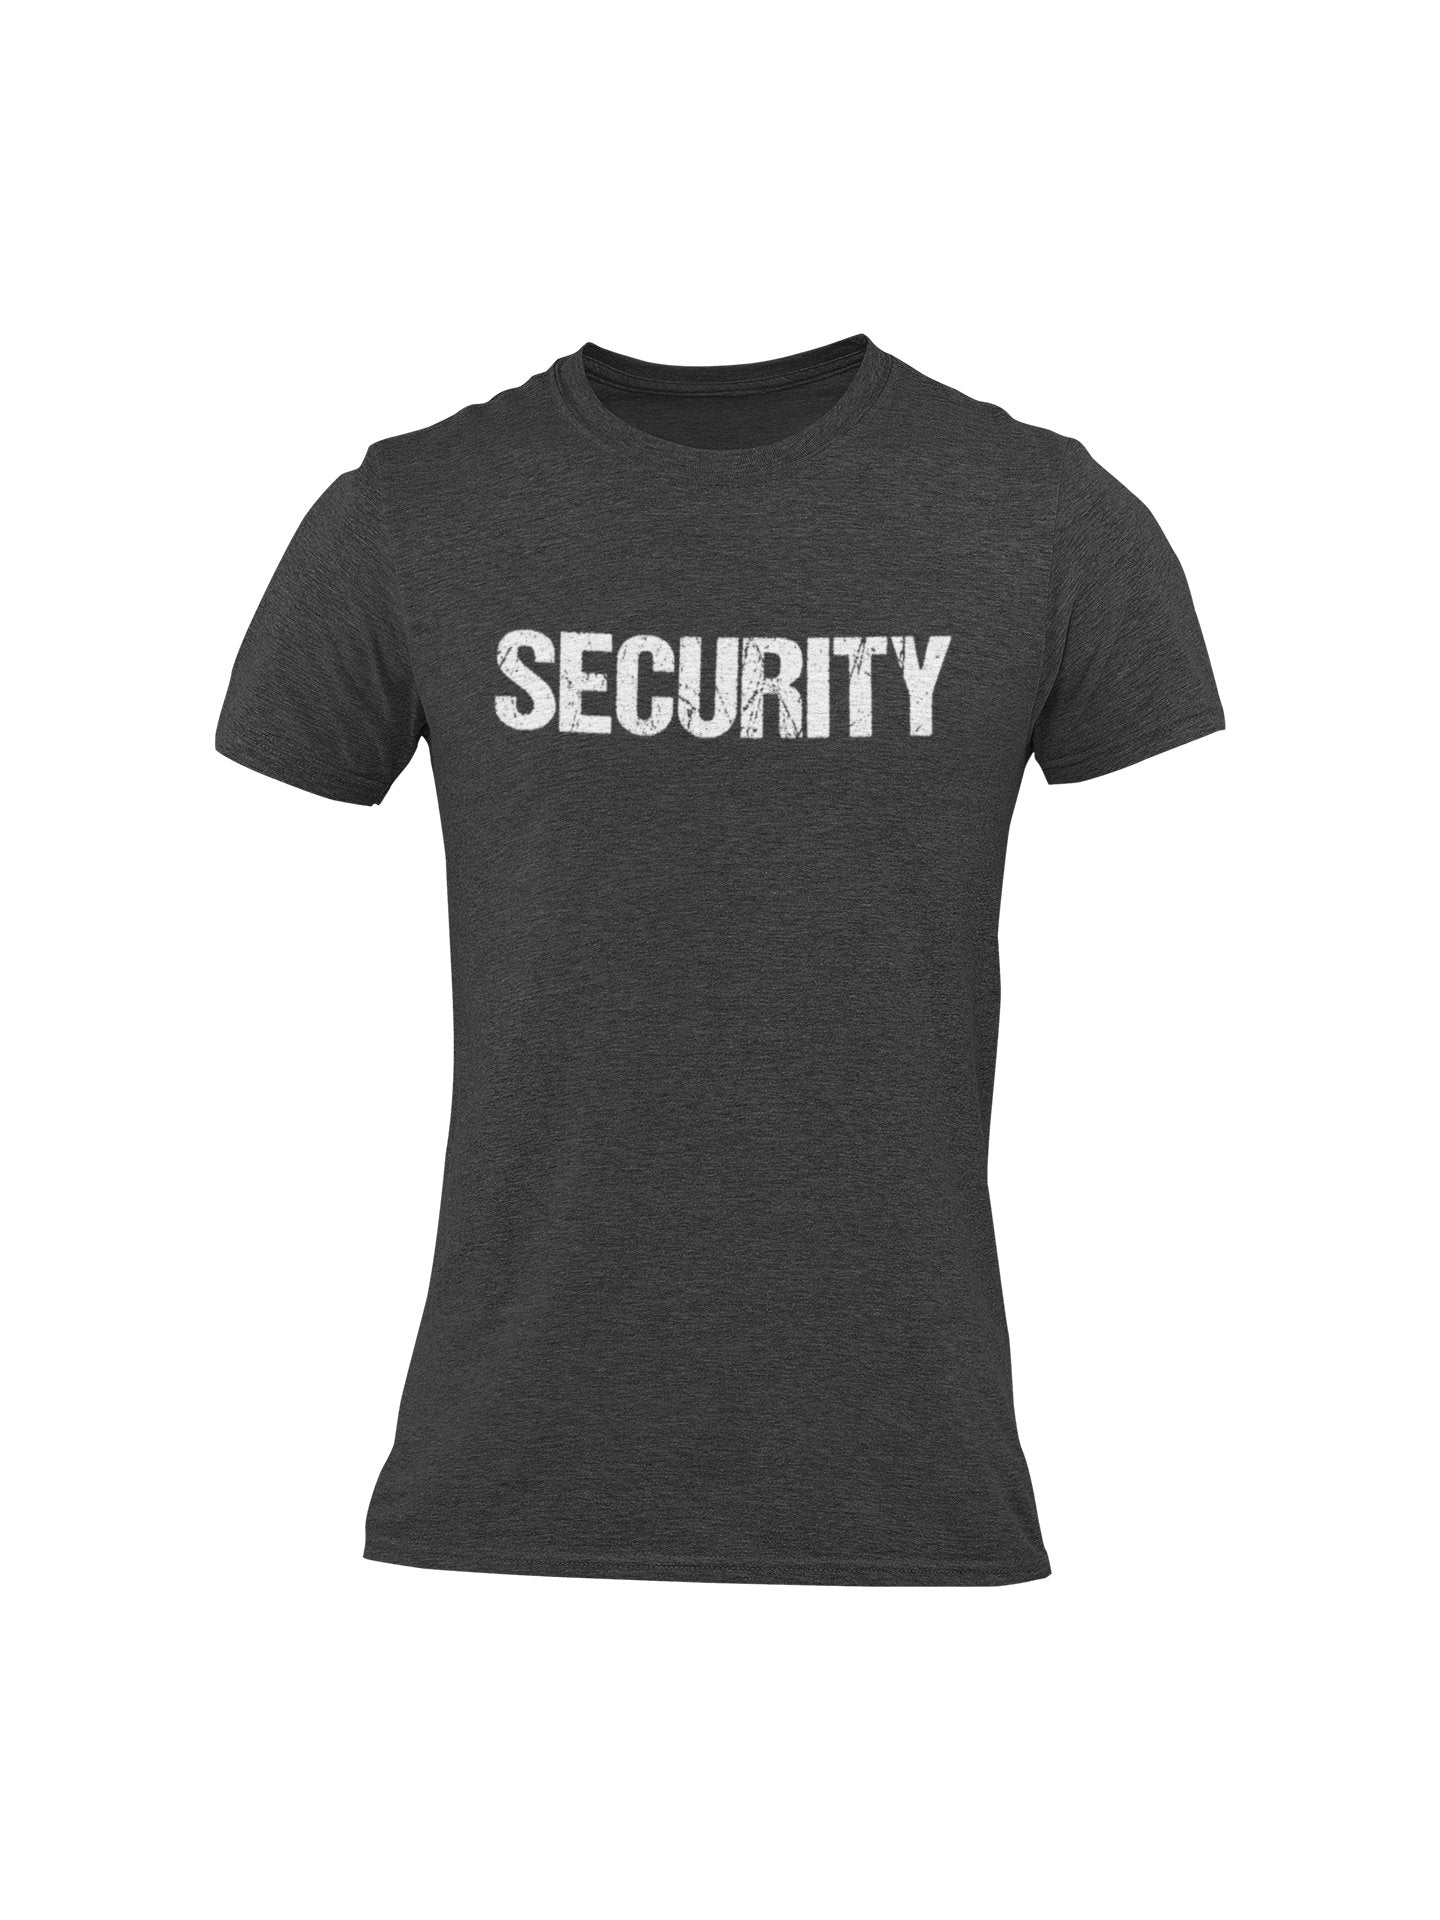 Security Men's Tee (Distressed Design, Heather Charcoal & White)